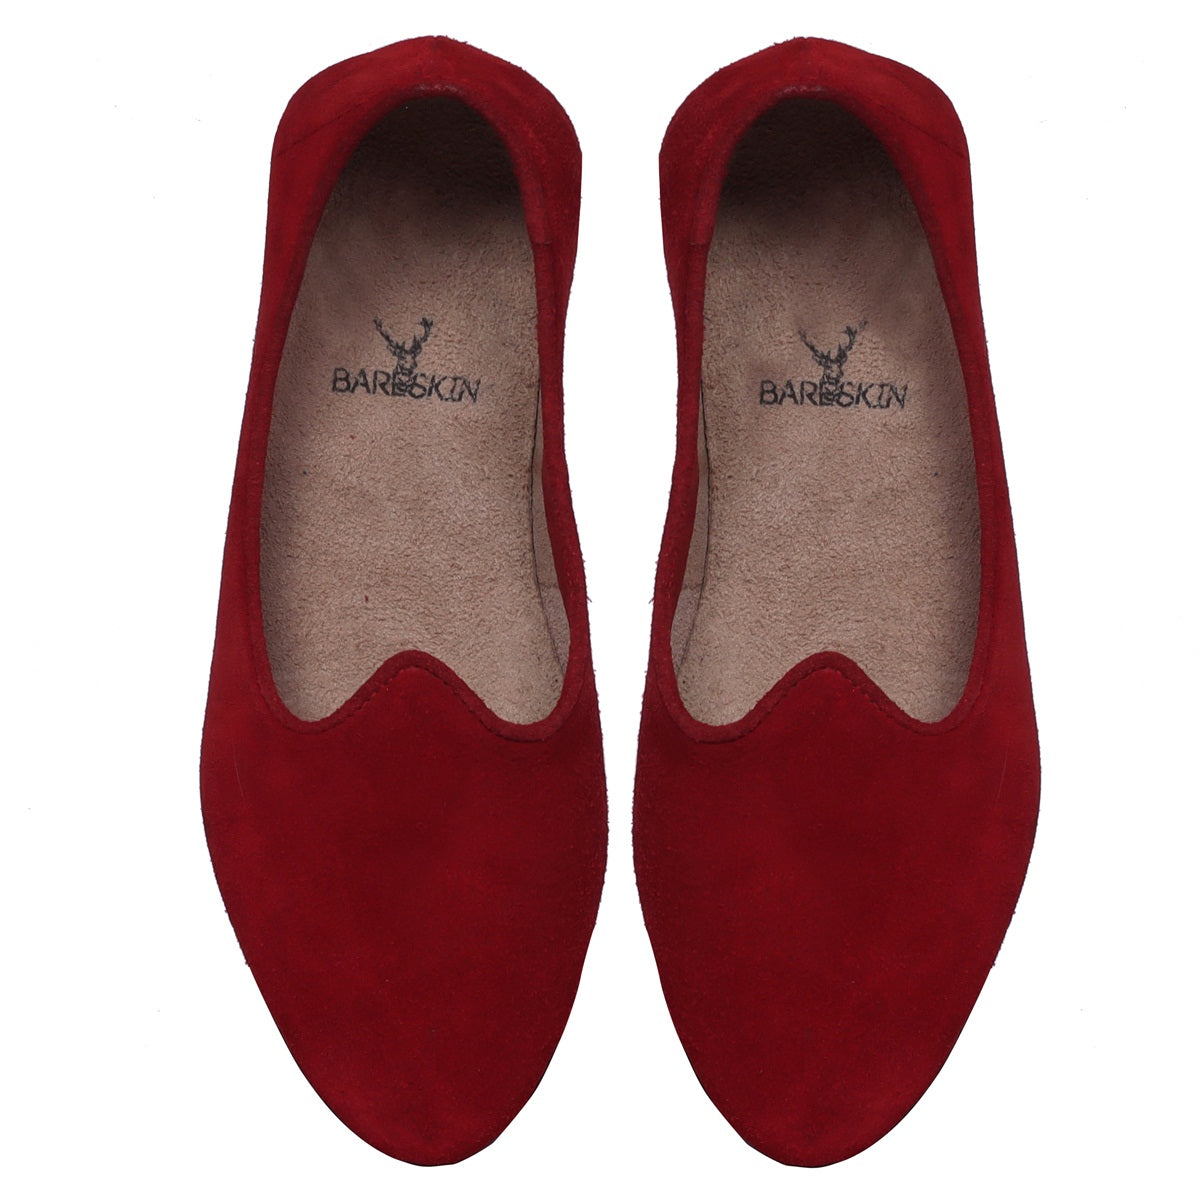 Red Suede Leather Jalsa Jutti For Men